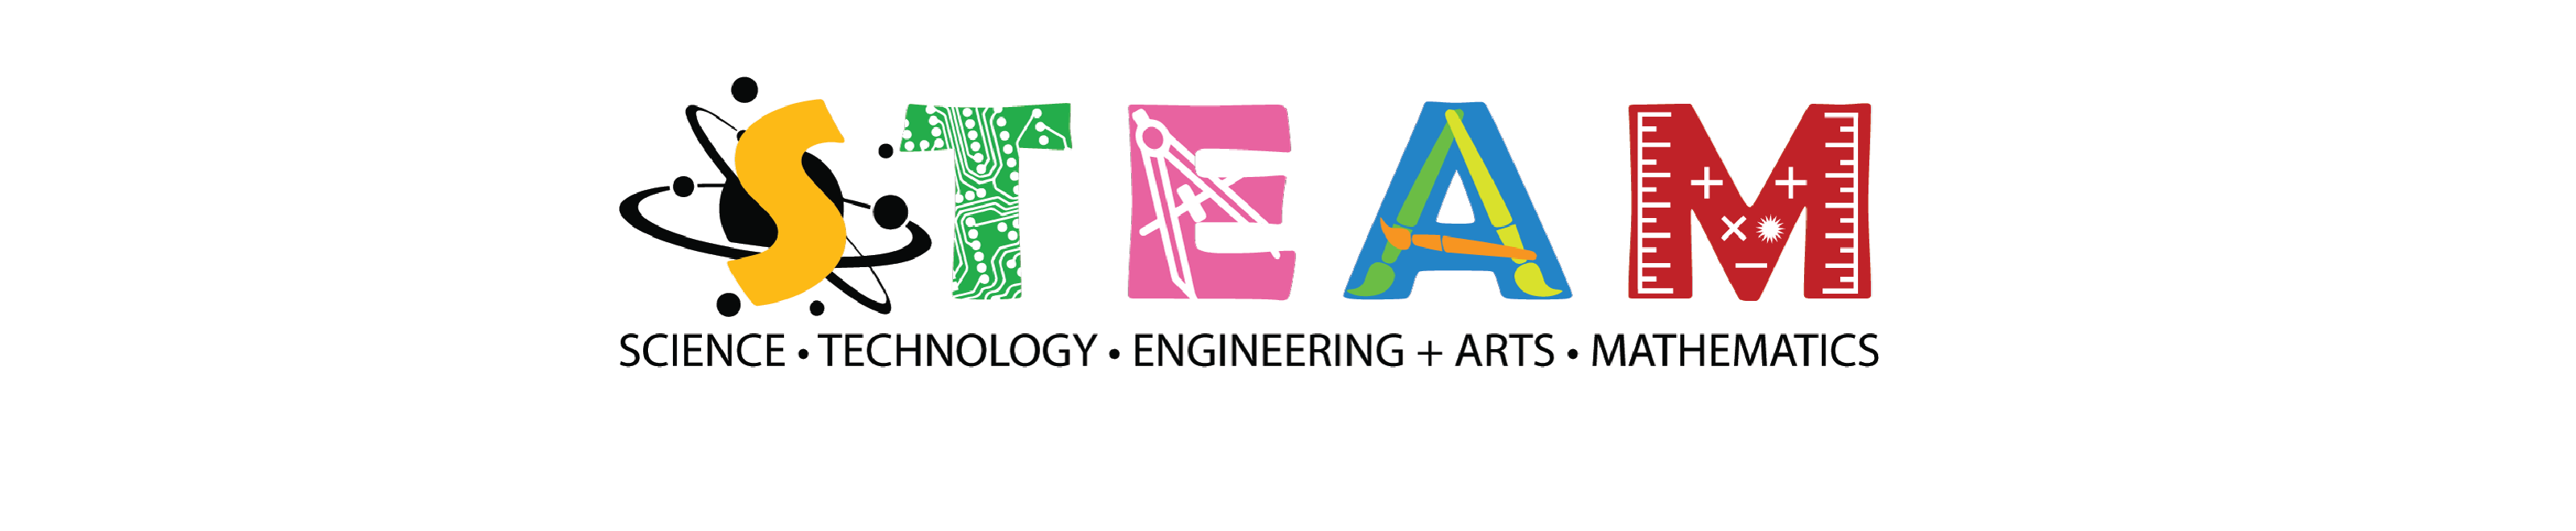 Science, Technology, Engineering, Art and Math logo